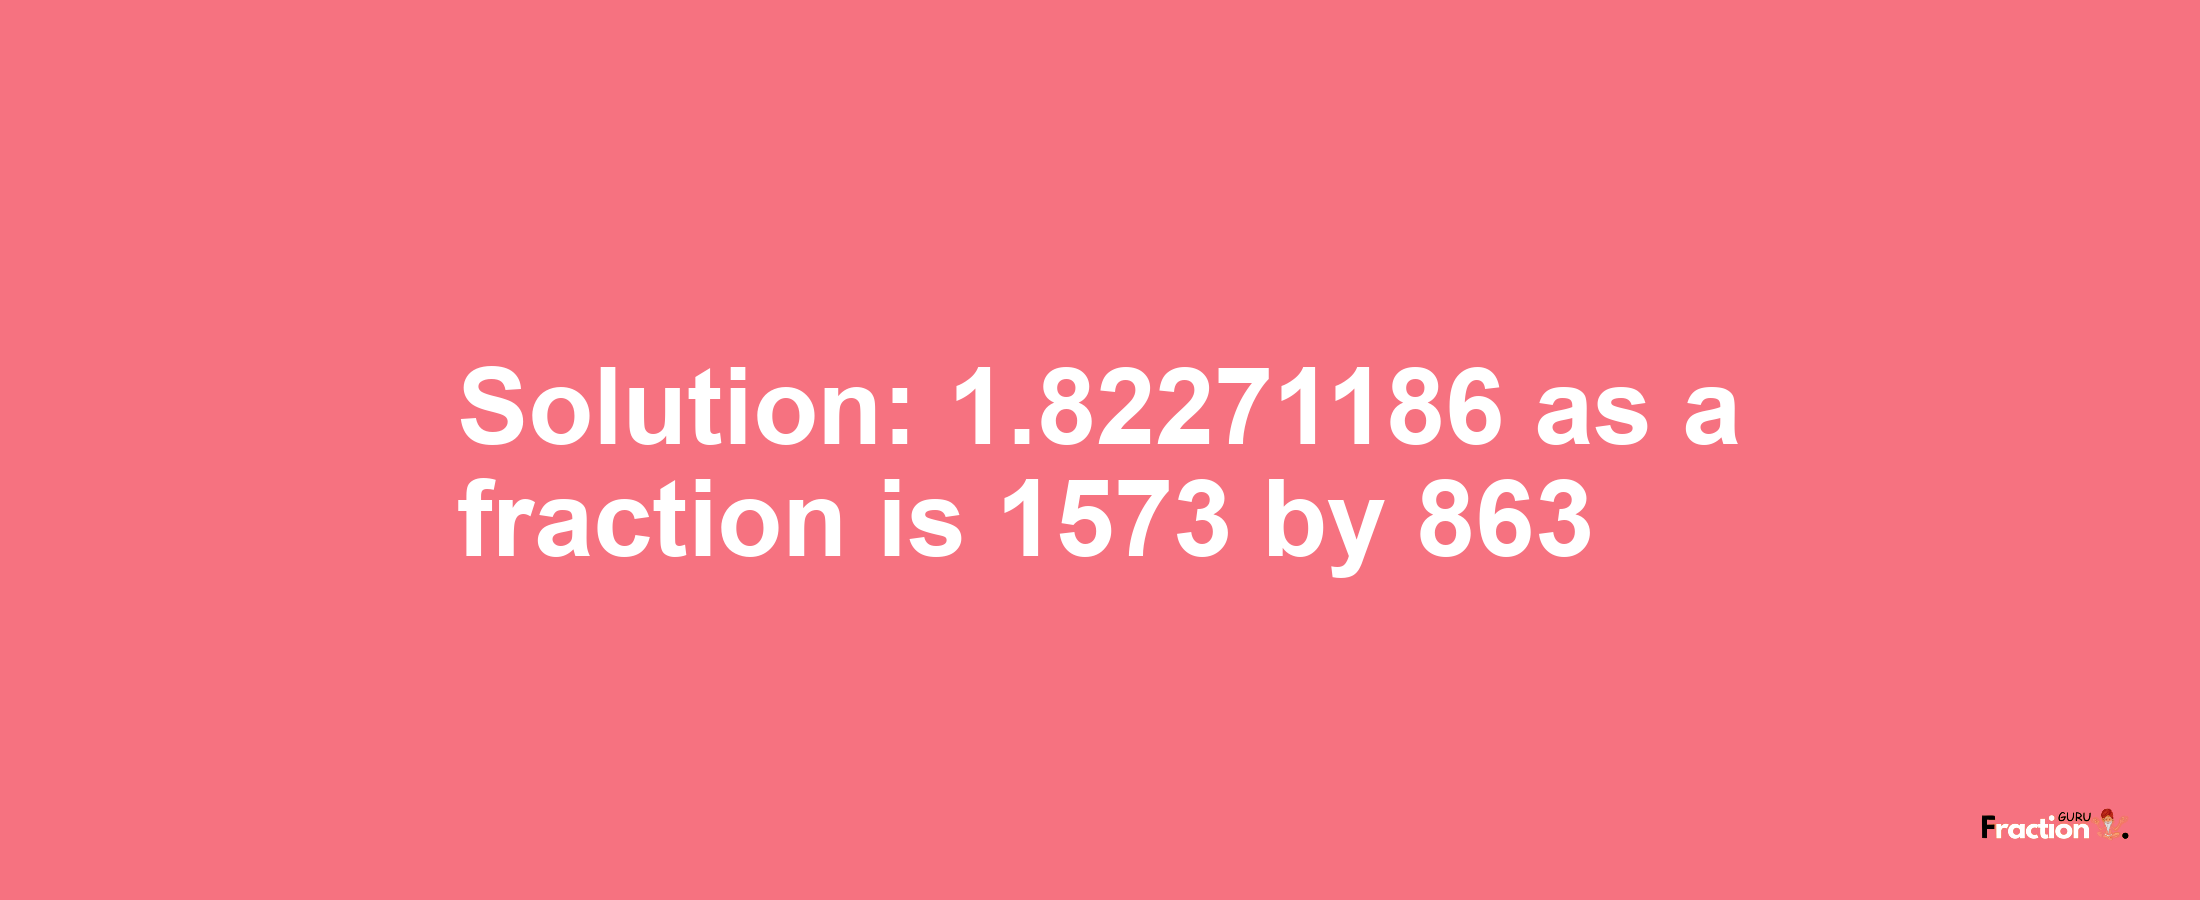 Solution:1.82271186 as a fraction is 1573/863